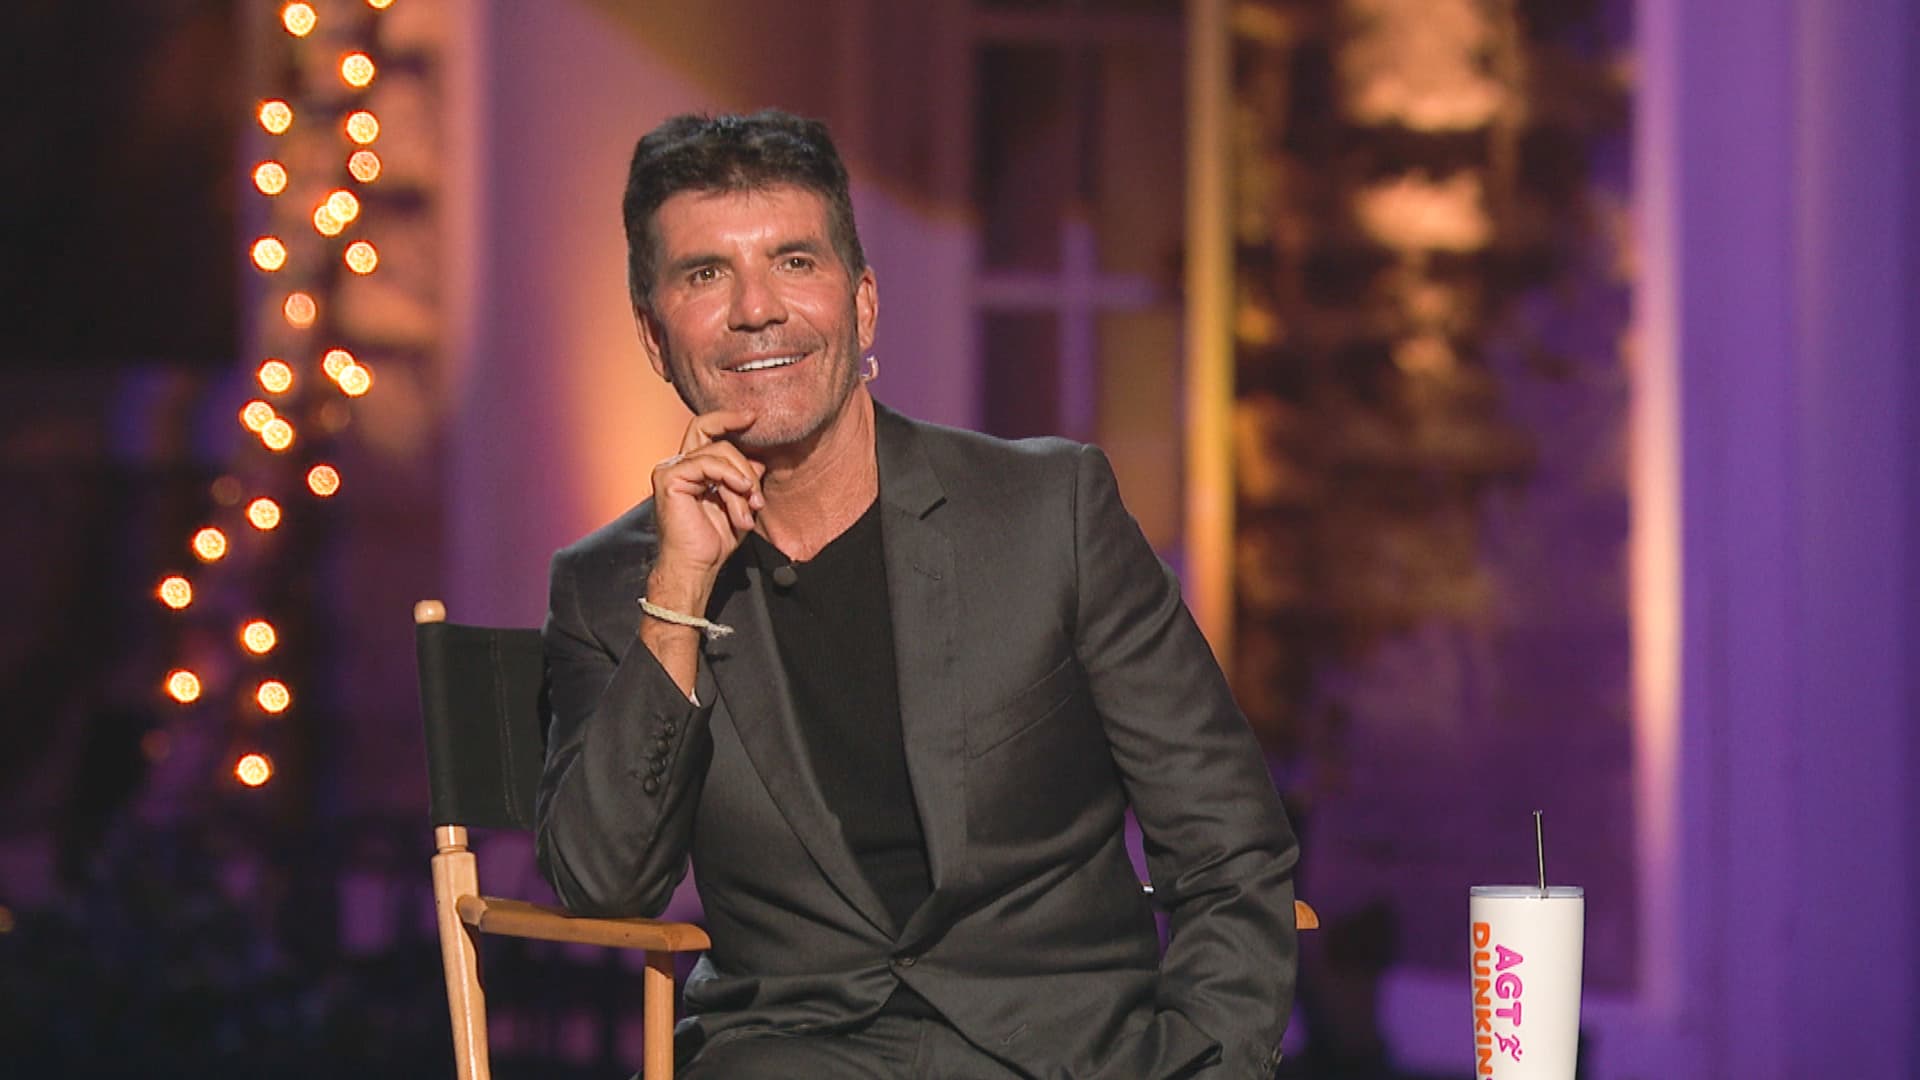 America’s Got Talent judge Simon Cowell says this advice from his dad inspired his success